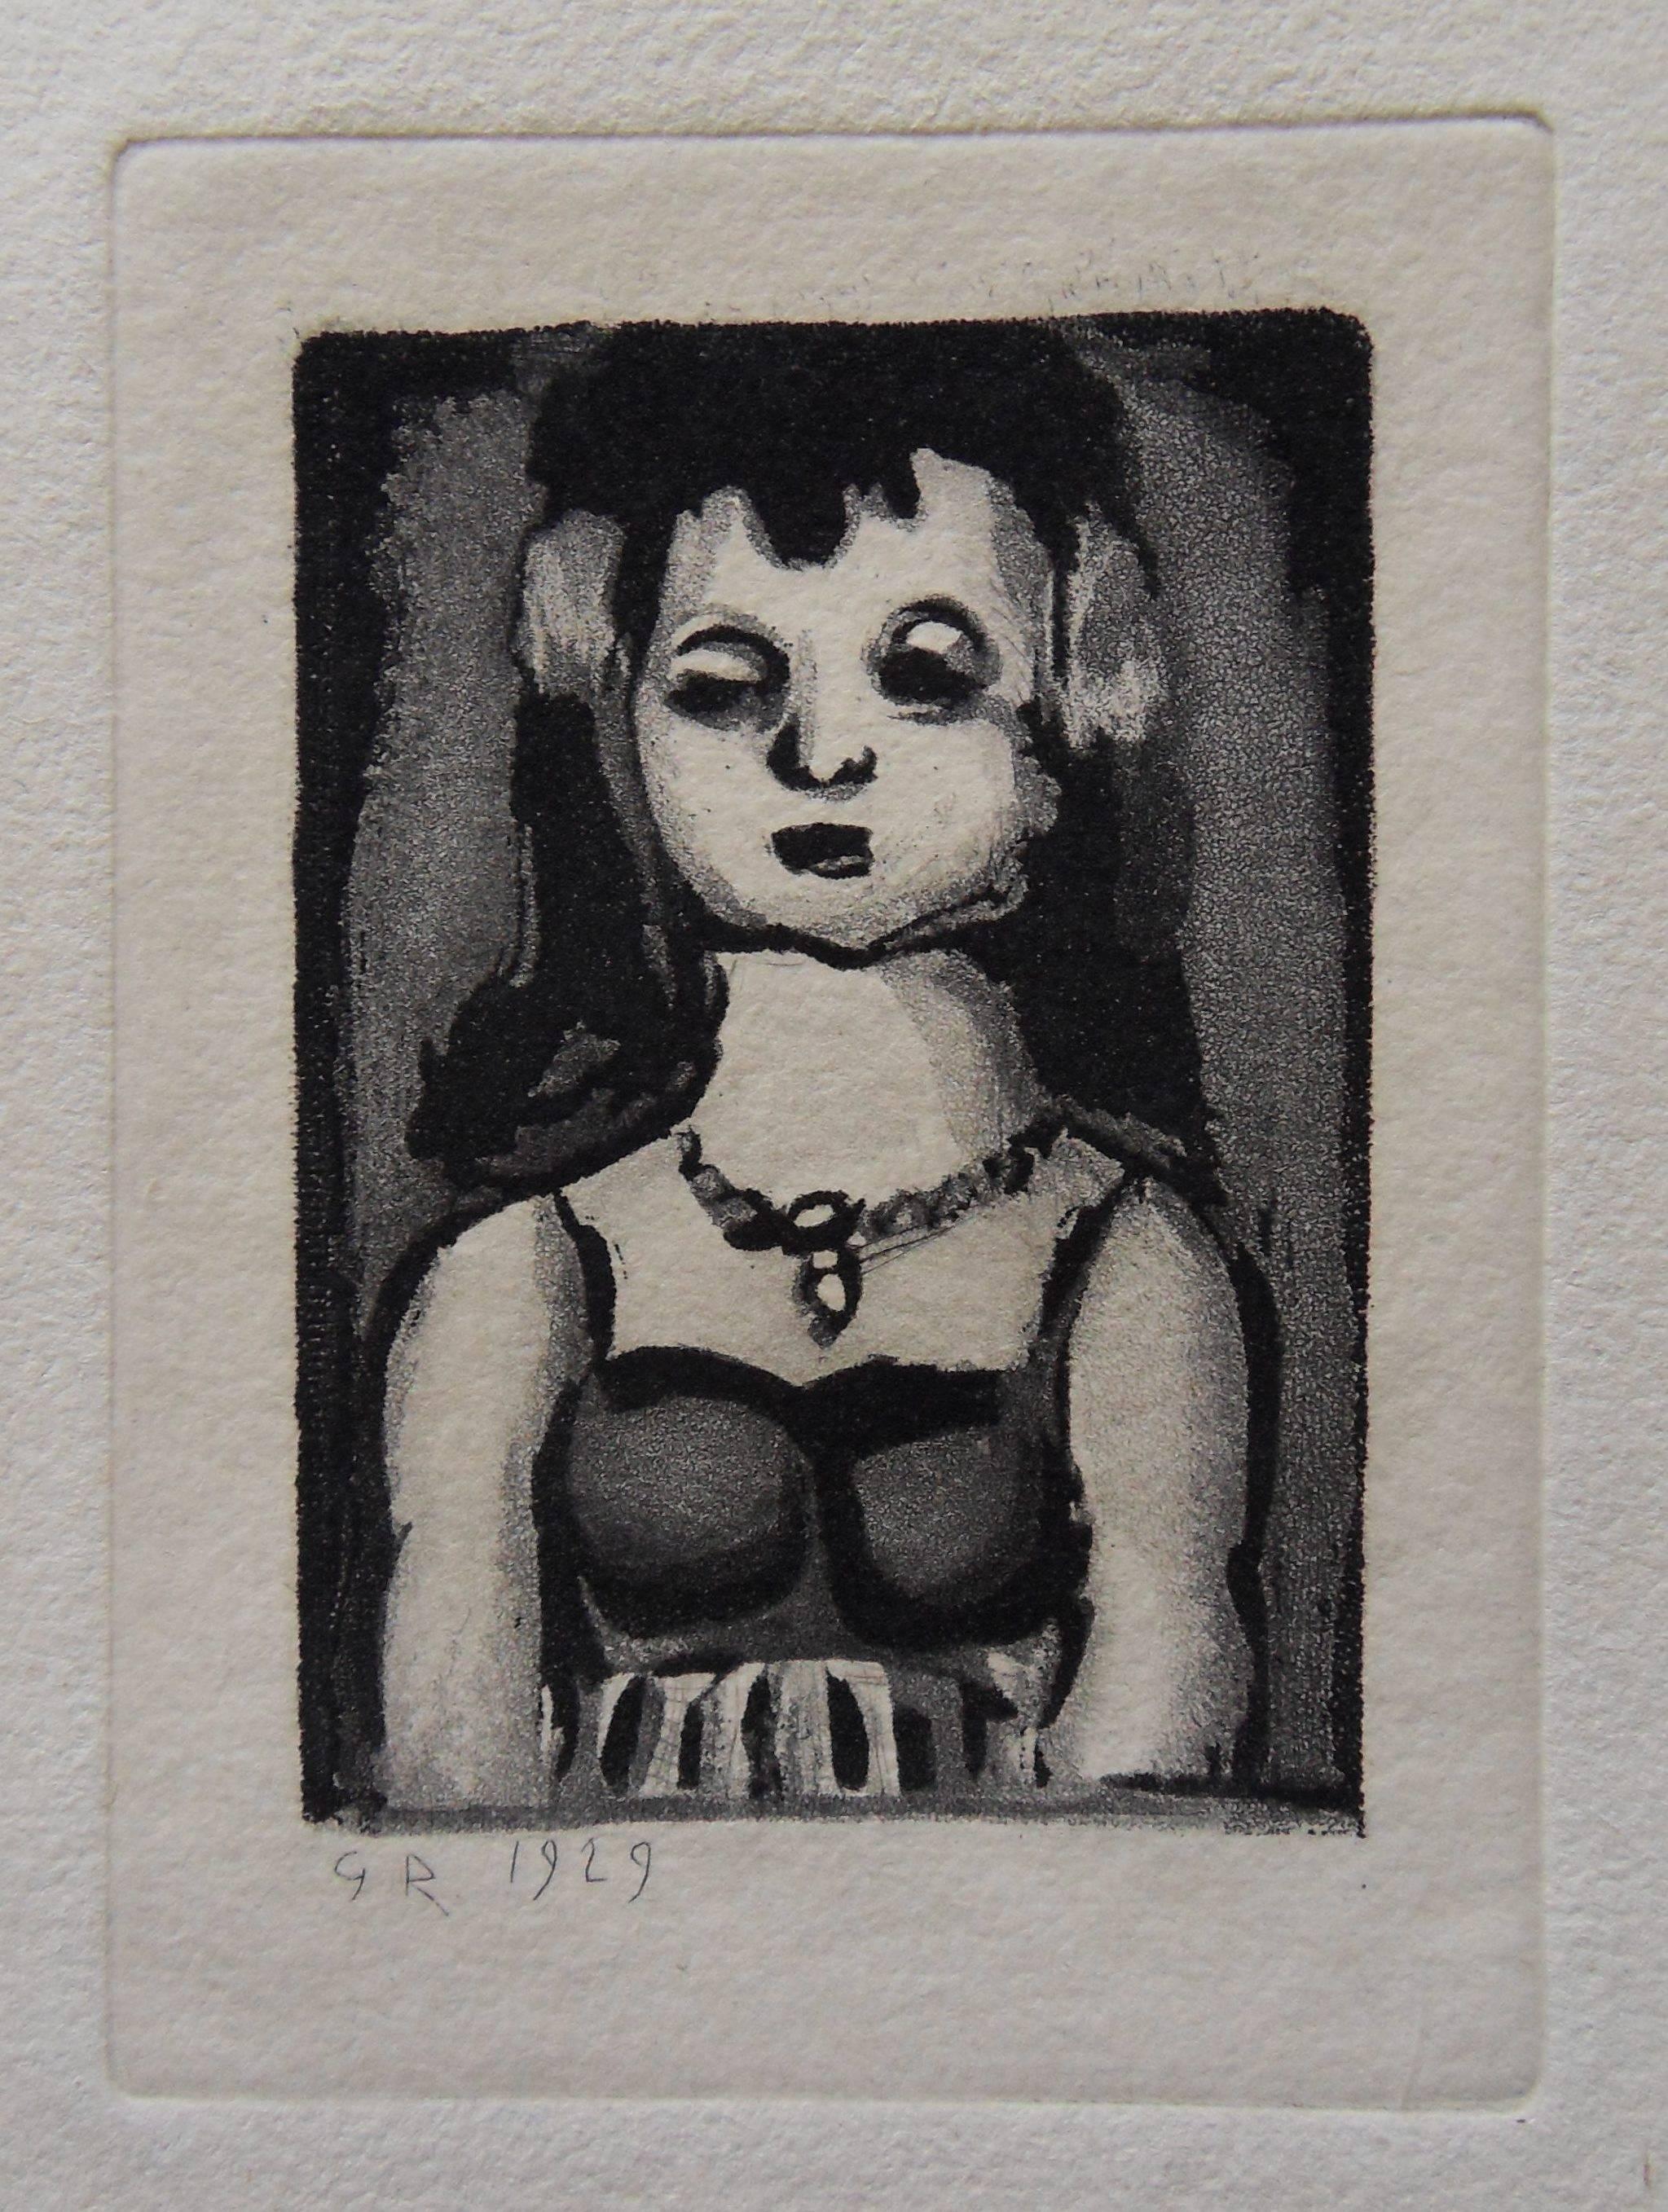 Georges Rouault Figurative Print - Woman with Flowers in the Hair - Original etching - 1929